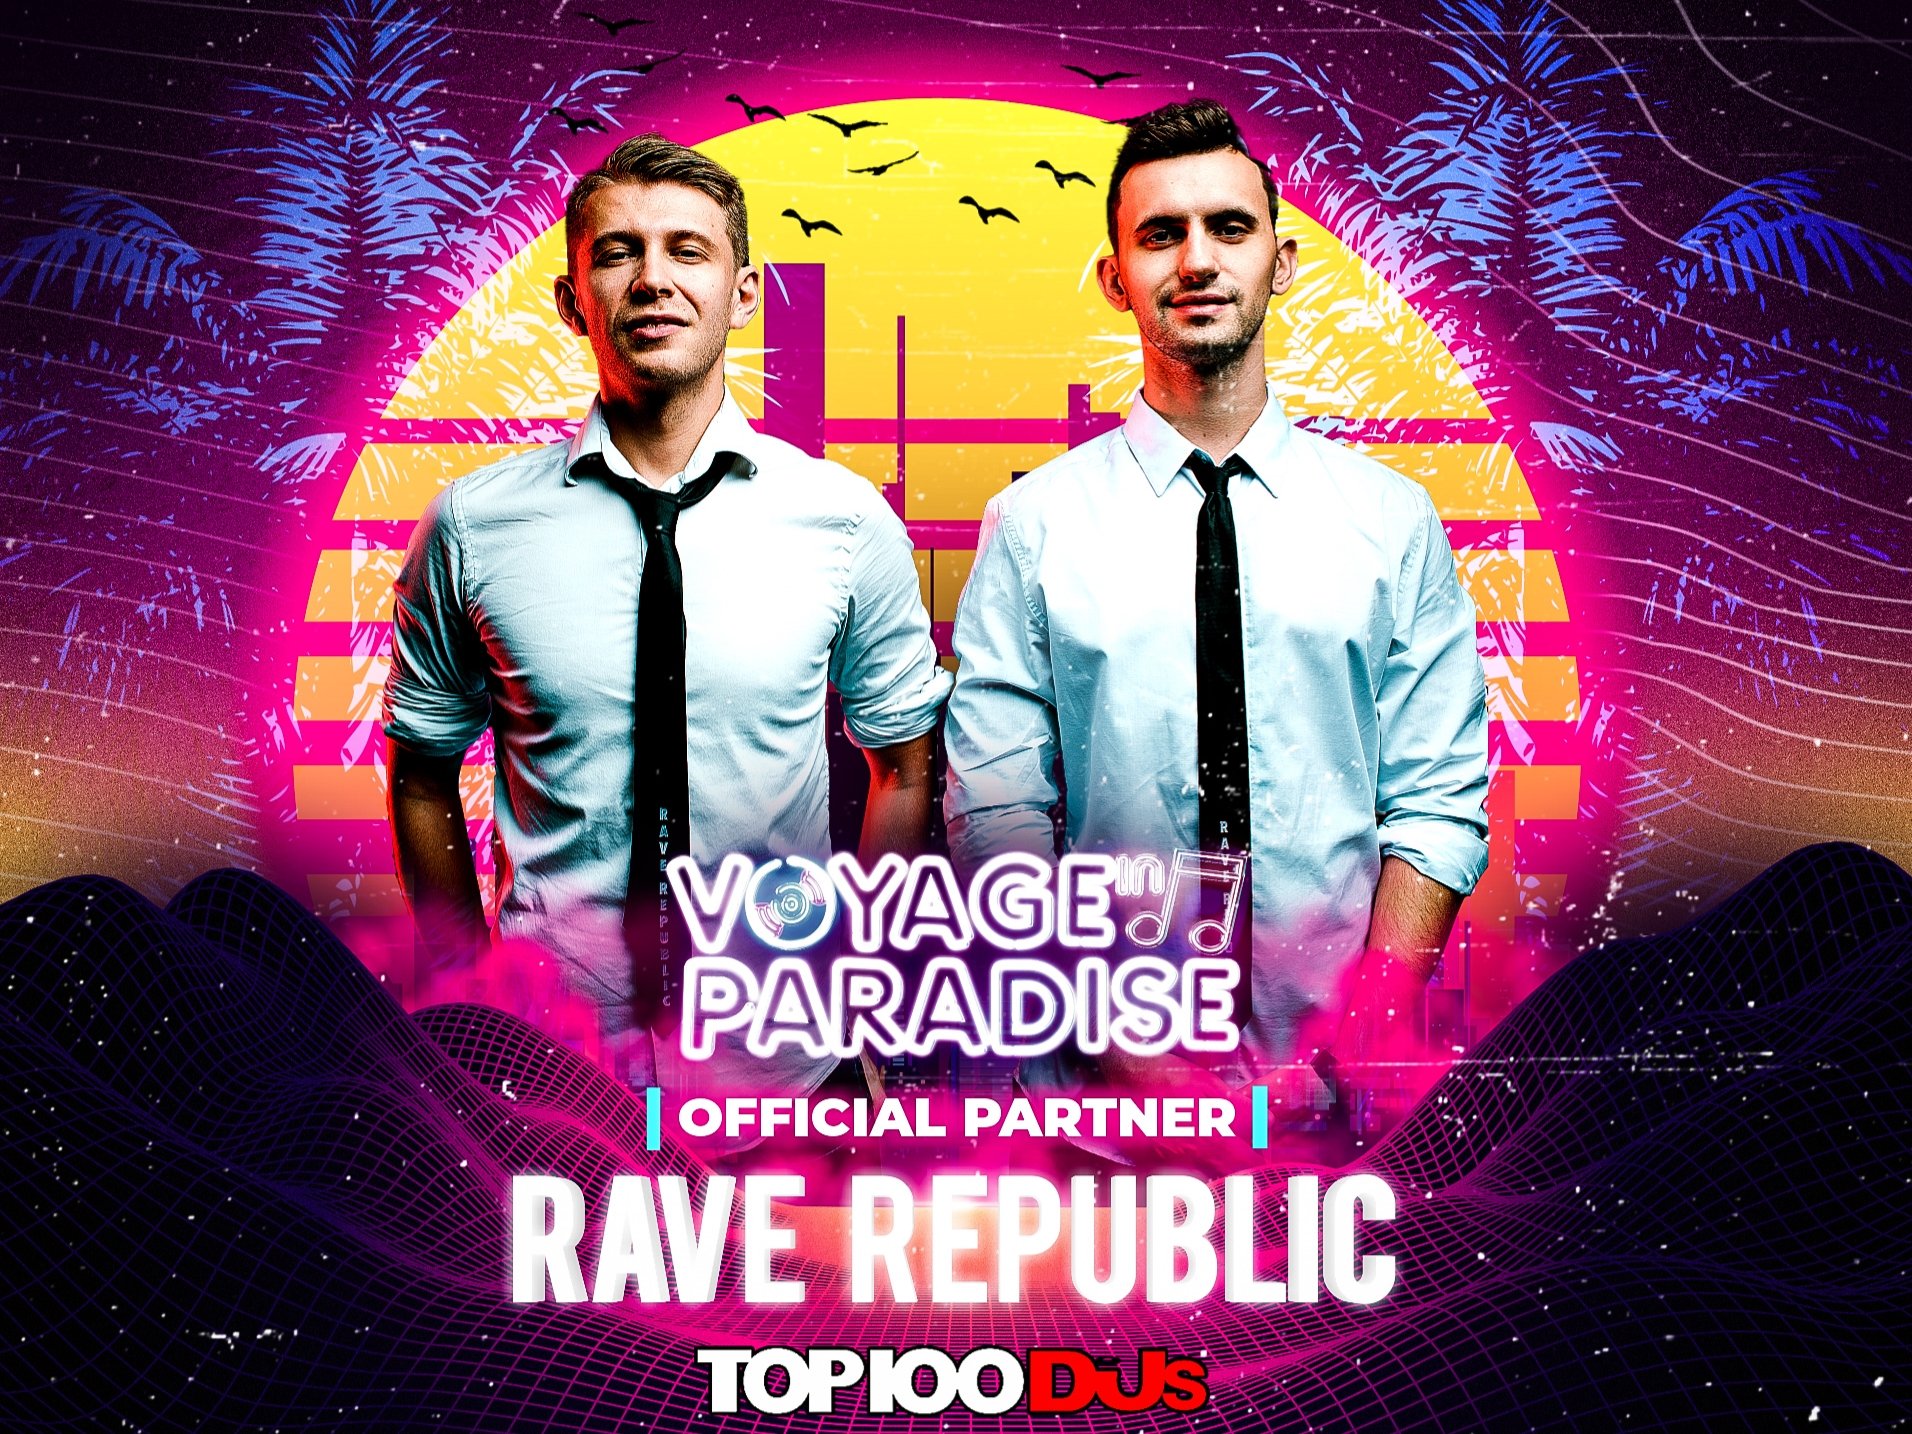 The first listen-to-earn NFT project Voyage In Paradise onboards Rave Republic